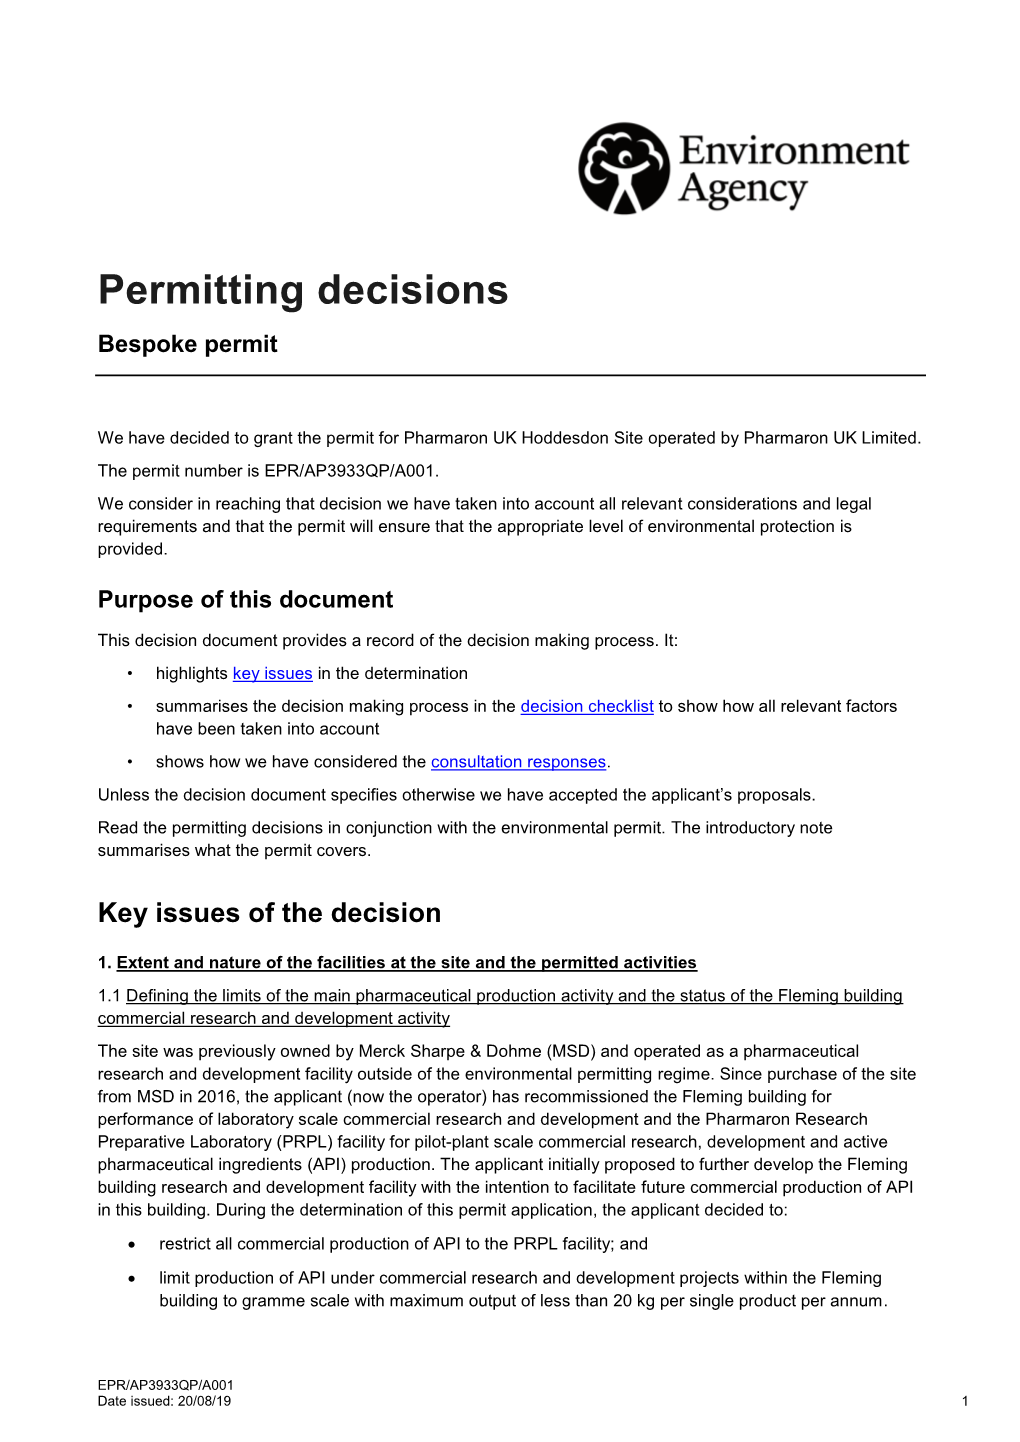 Decision Document Provides a Record of the Decision Making Process